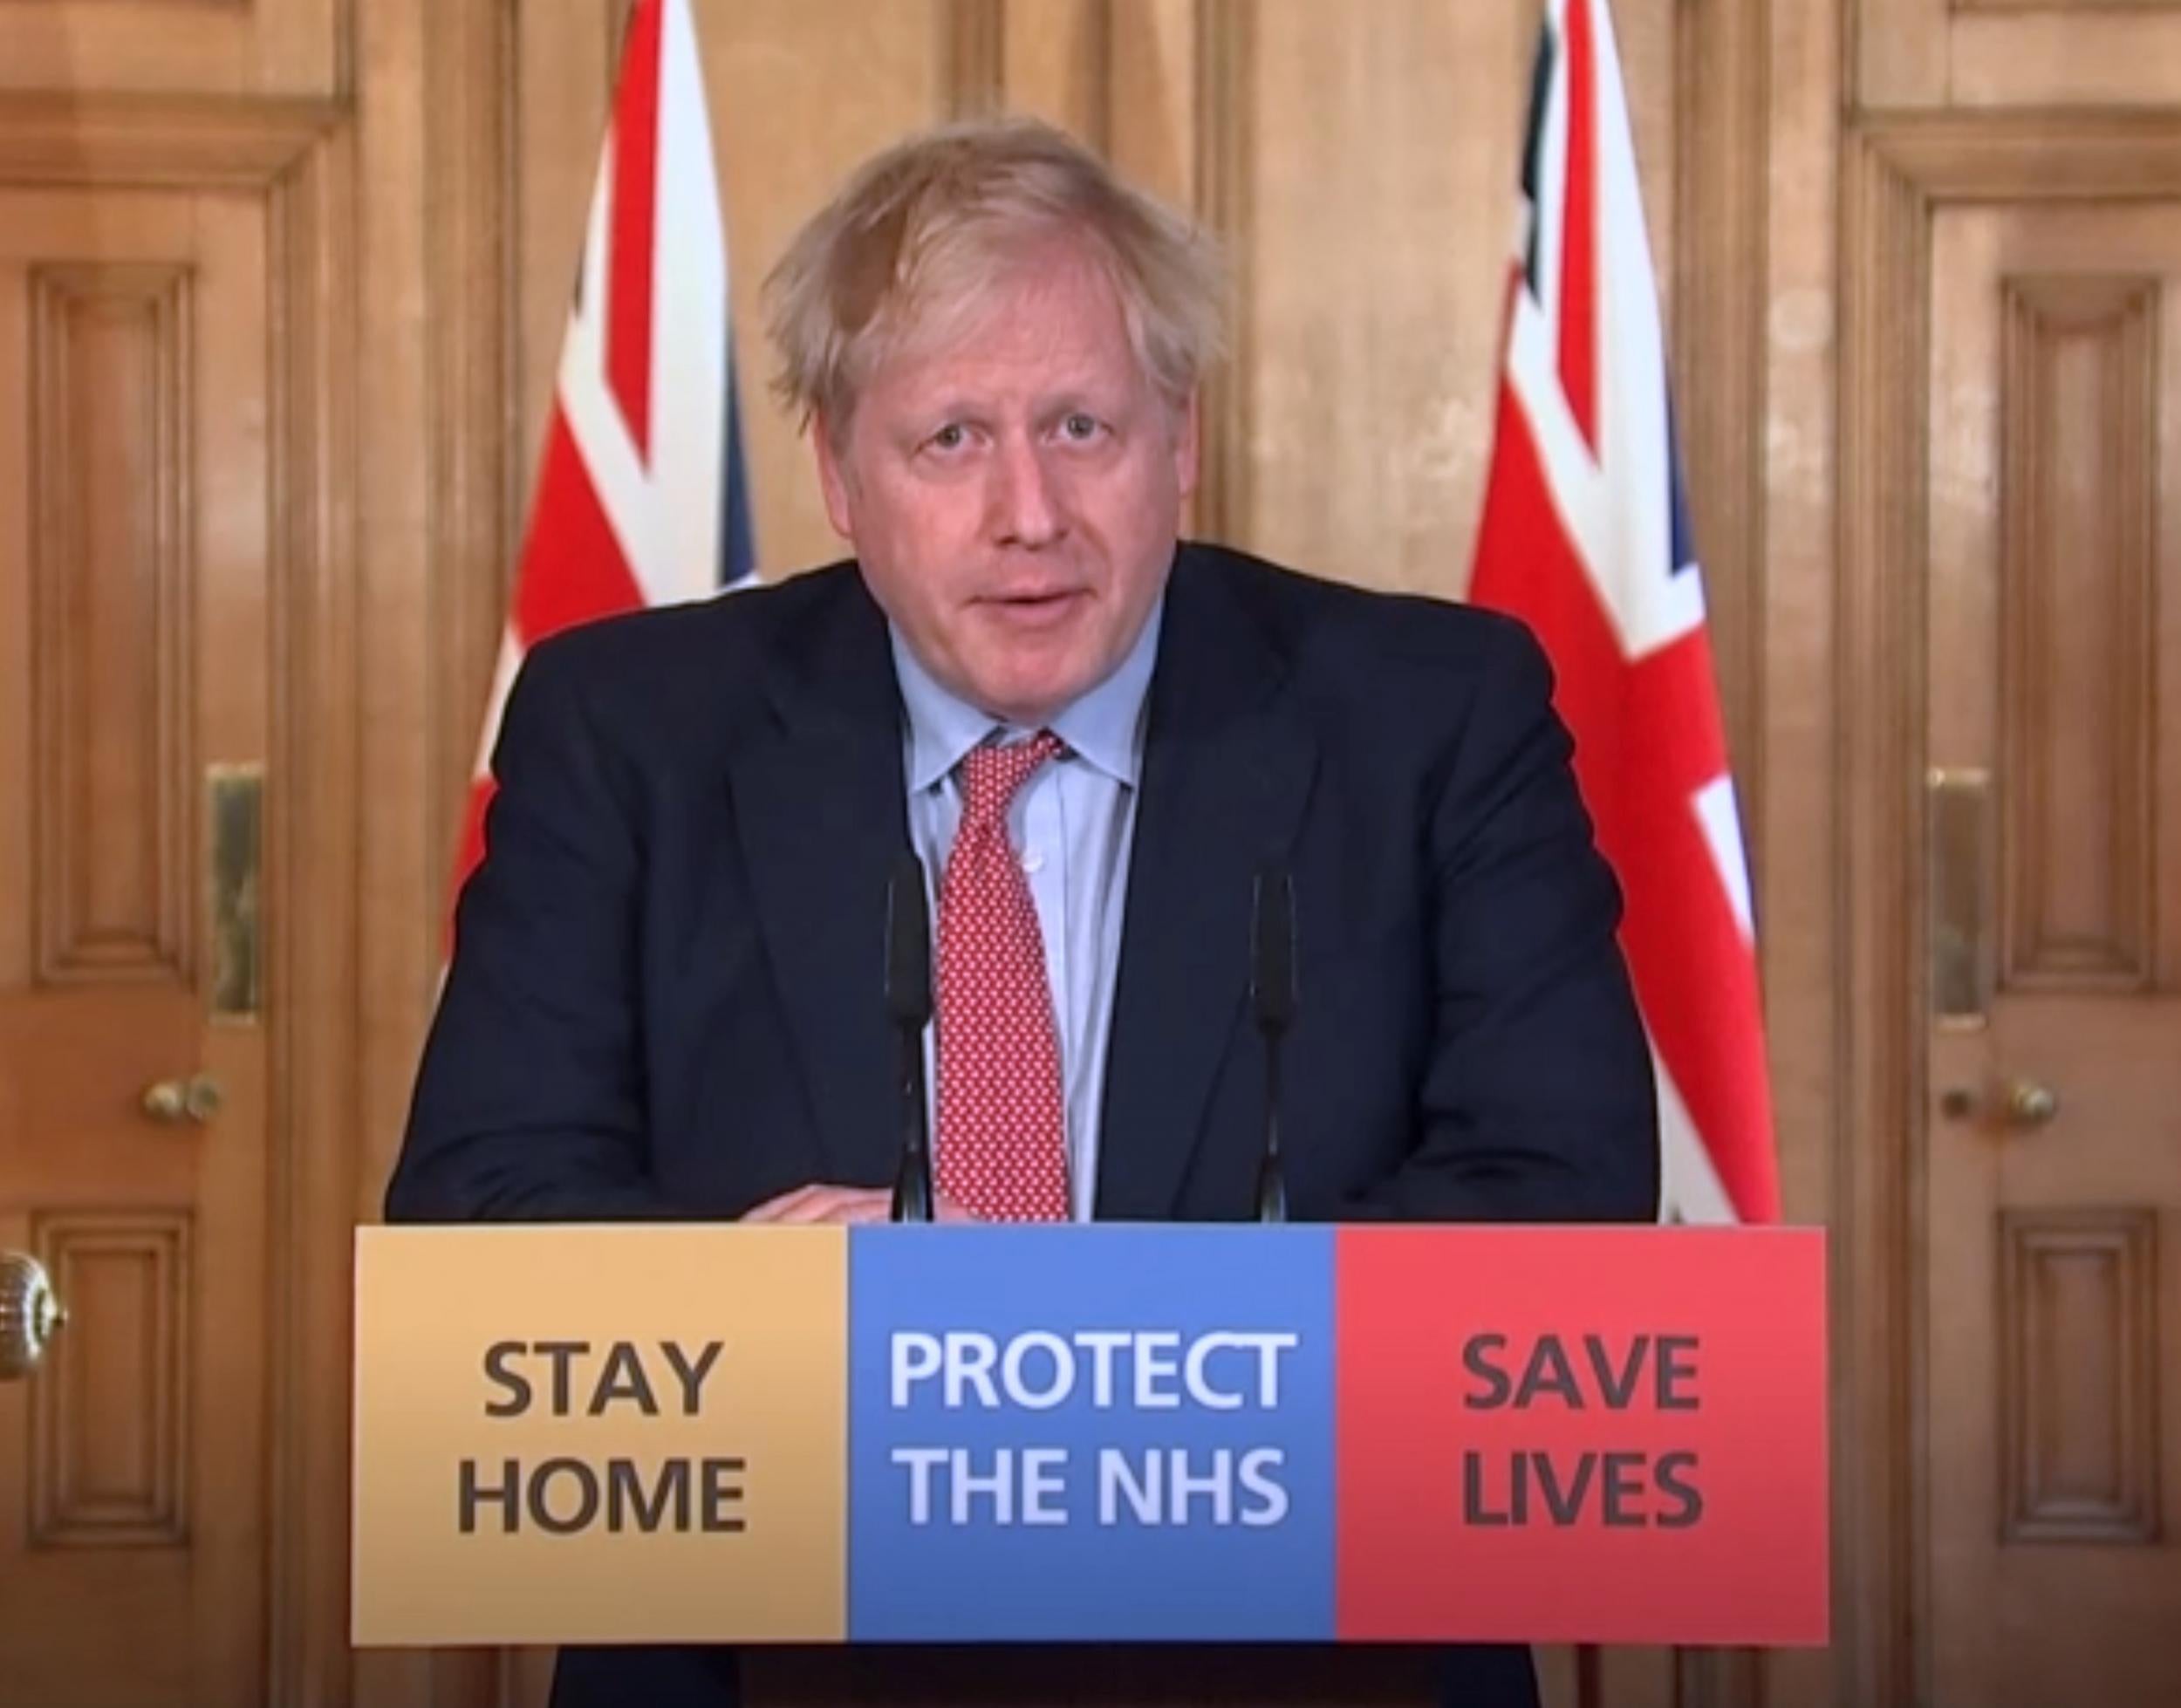 The prime minister has spoken about the UK leading efforts to fight coronavirus